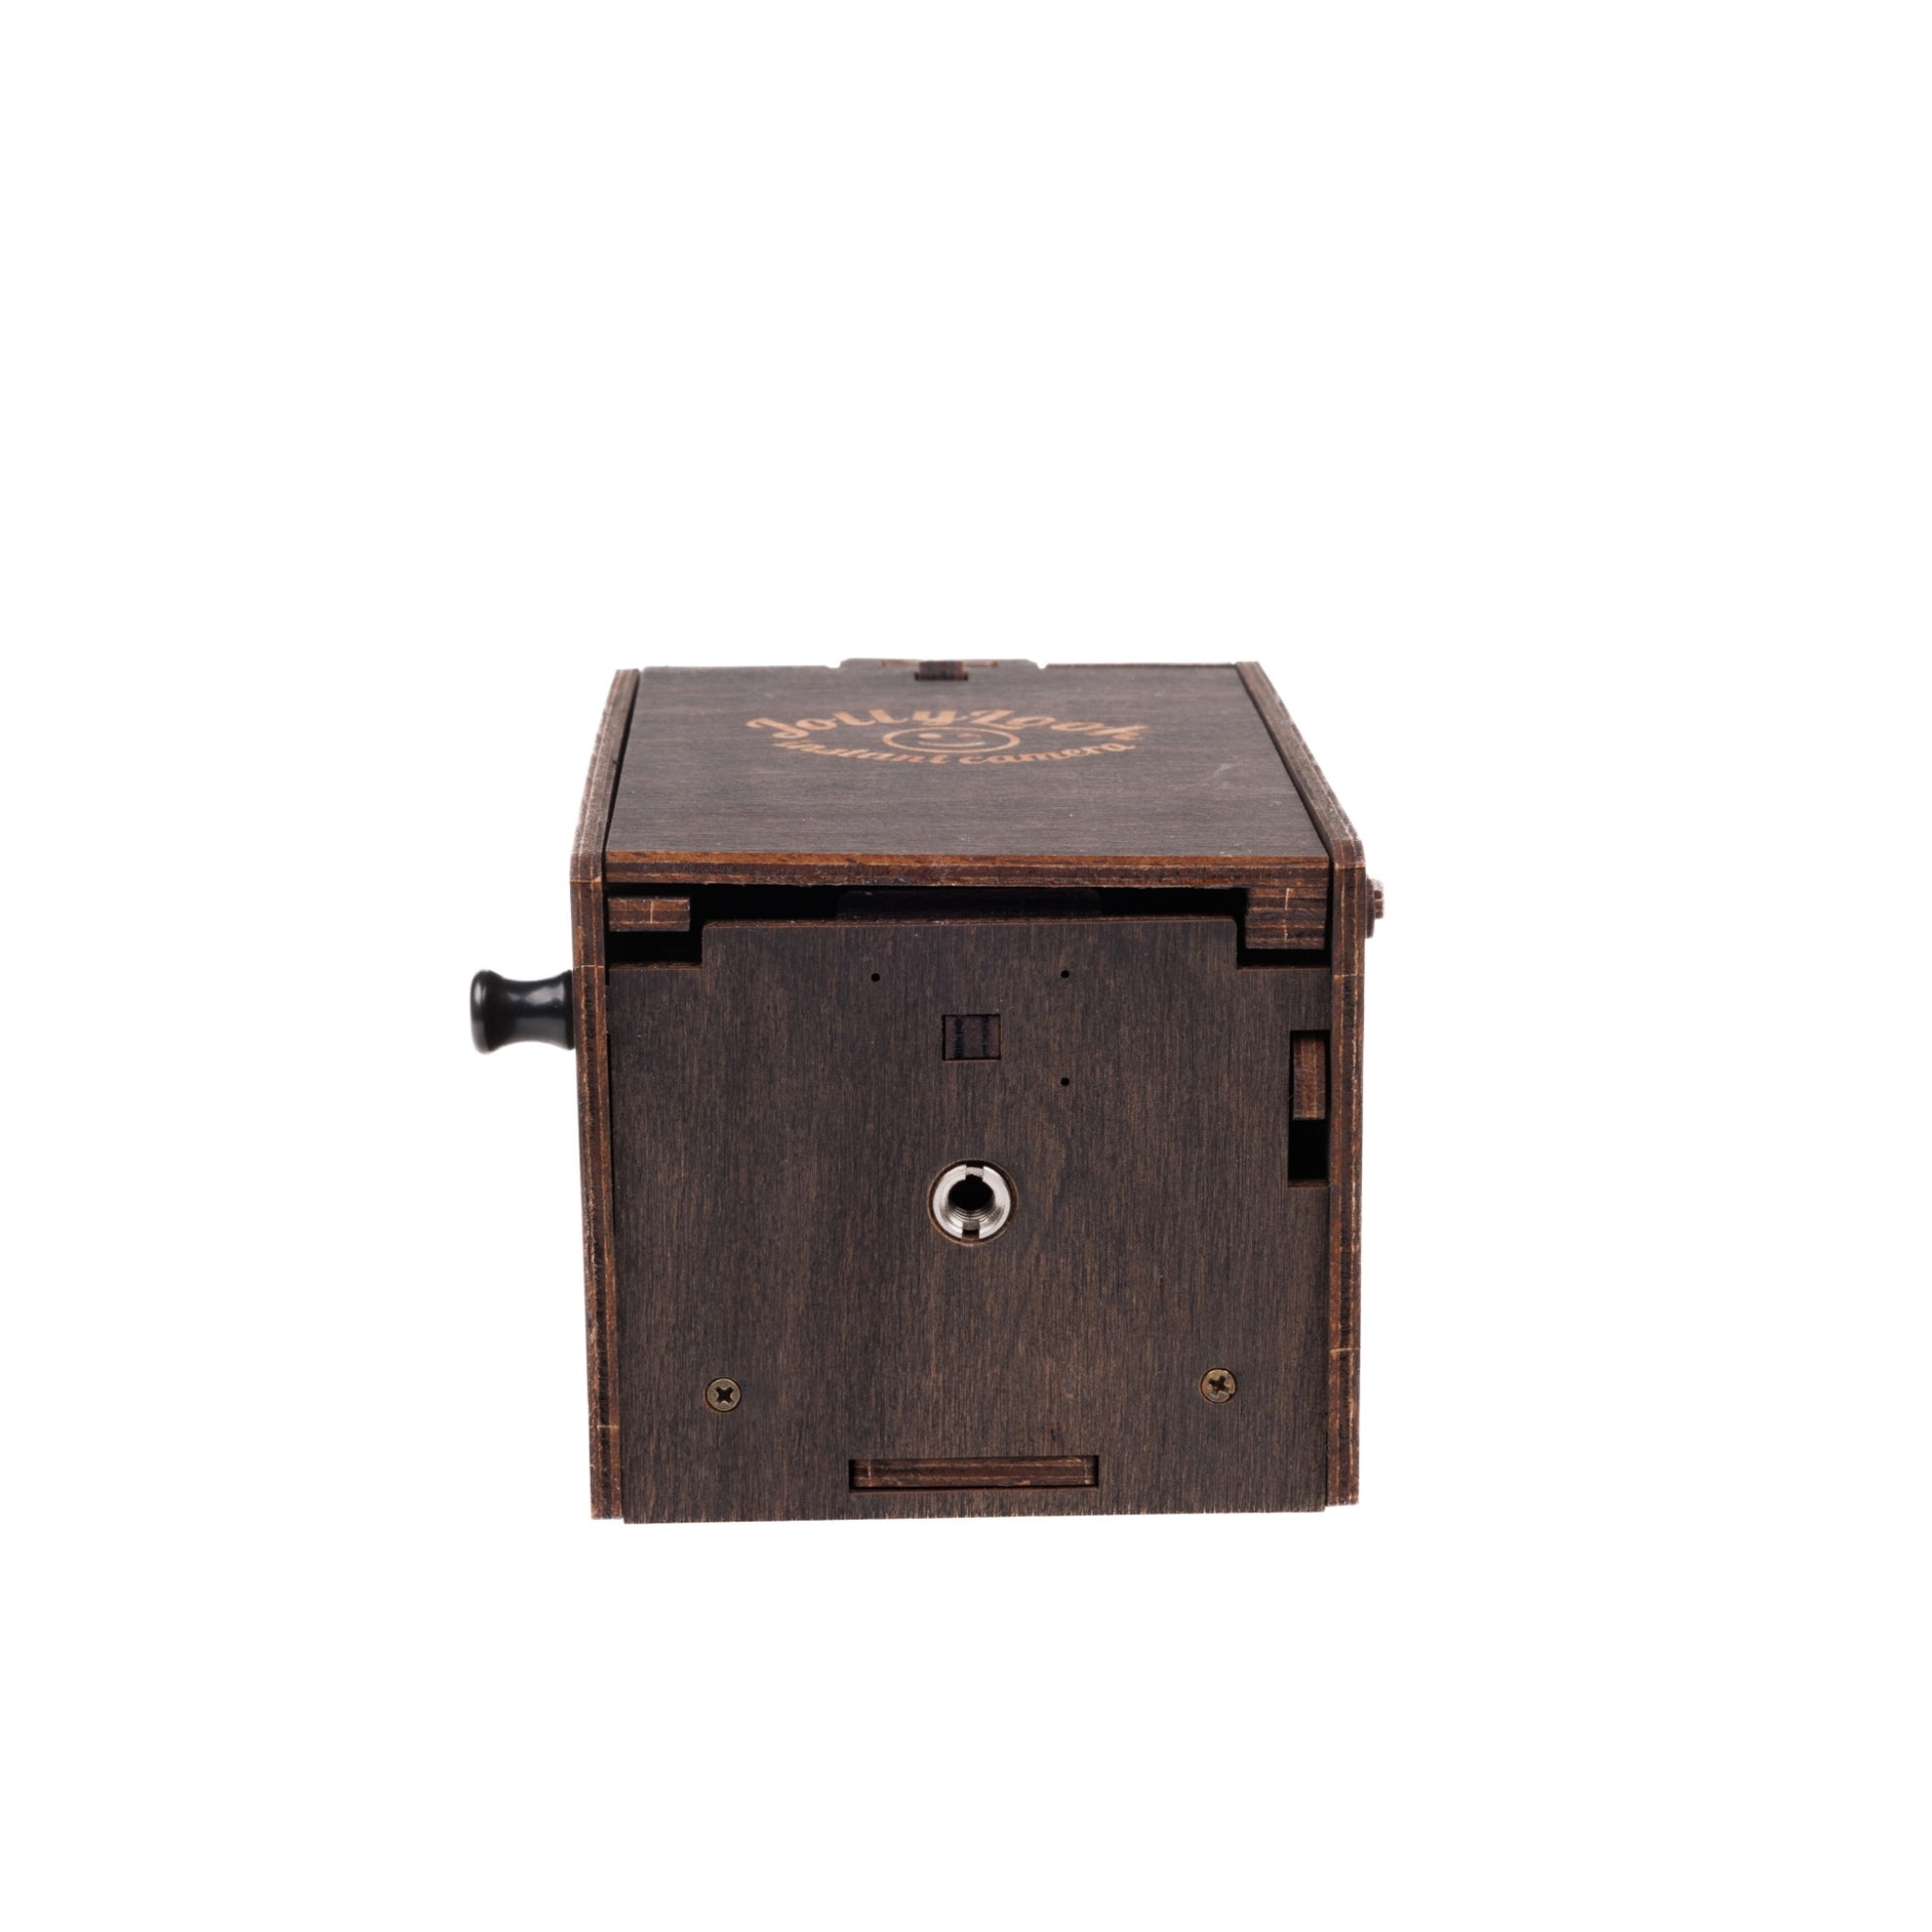 Folded Pre-assembled Pinhole Instant Mini Film Camera in Stained Brown Color against white background